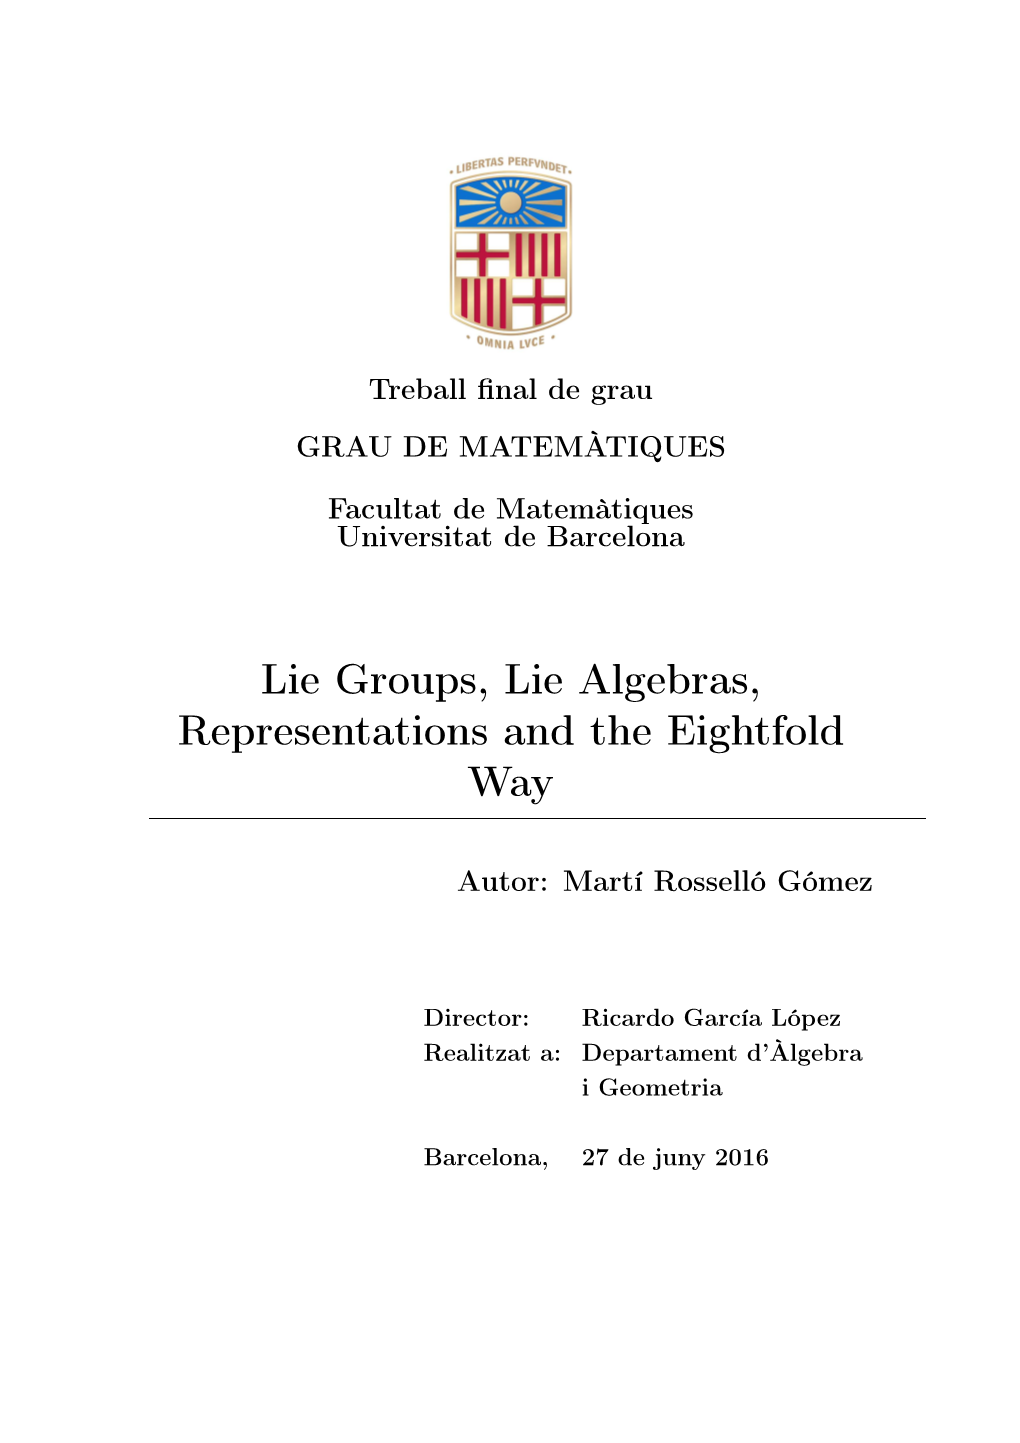 Lie Groups, Lie Algebras, Representations and the Eightfold Way